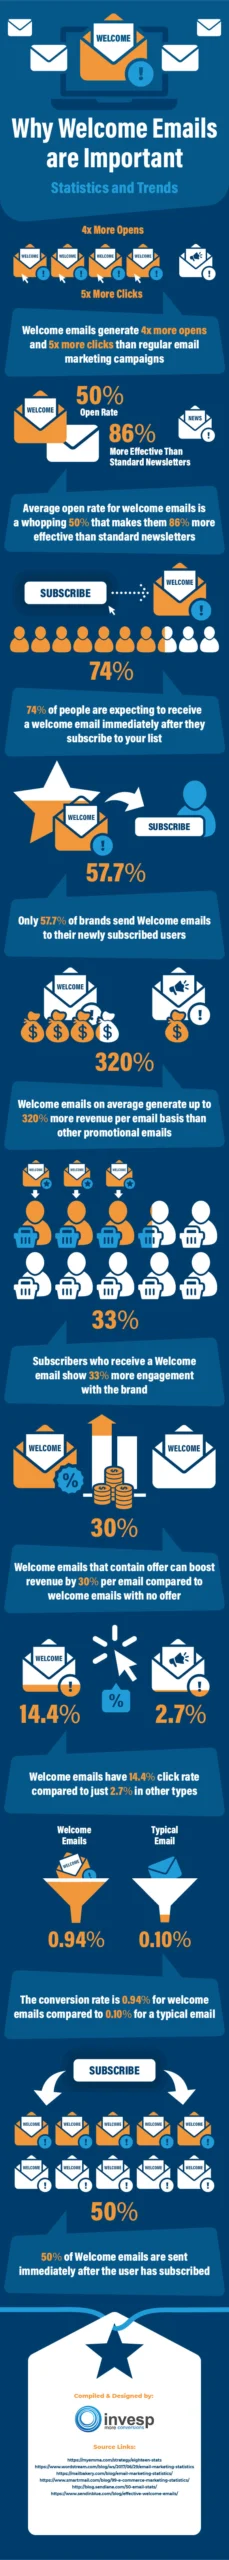 Why Welcome Emails Are Important – Statistics And Trends [Infographic]